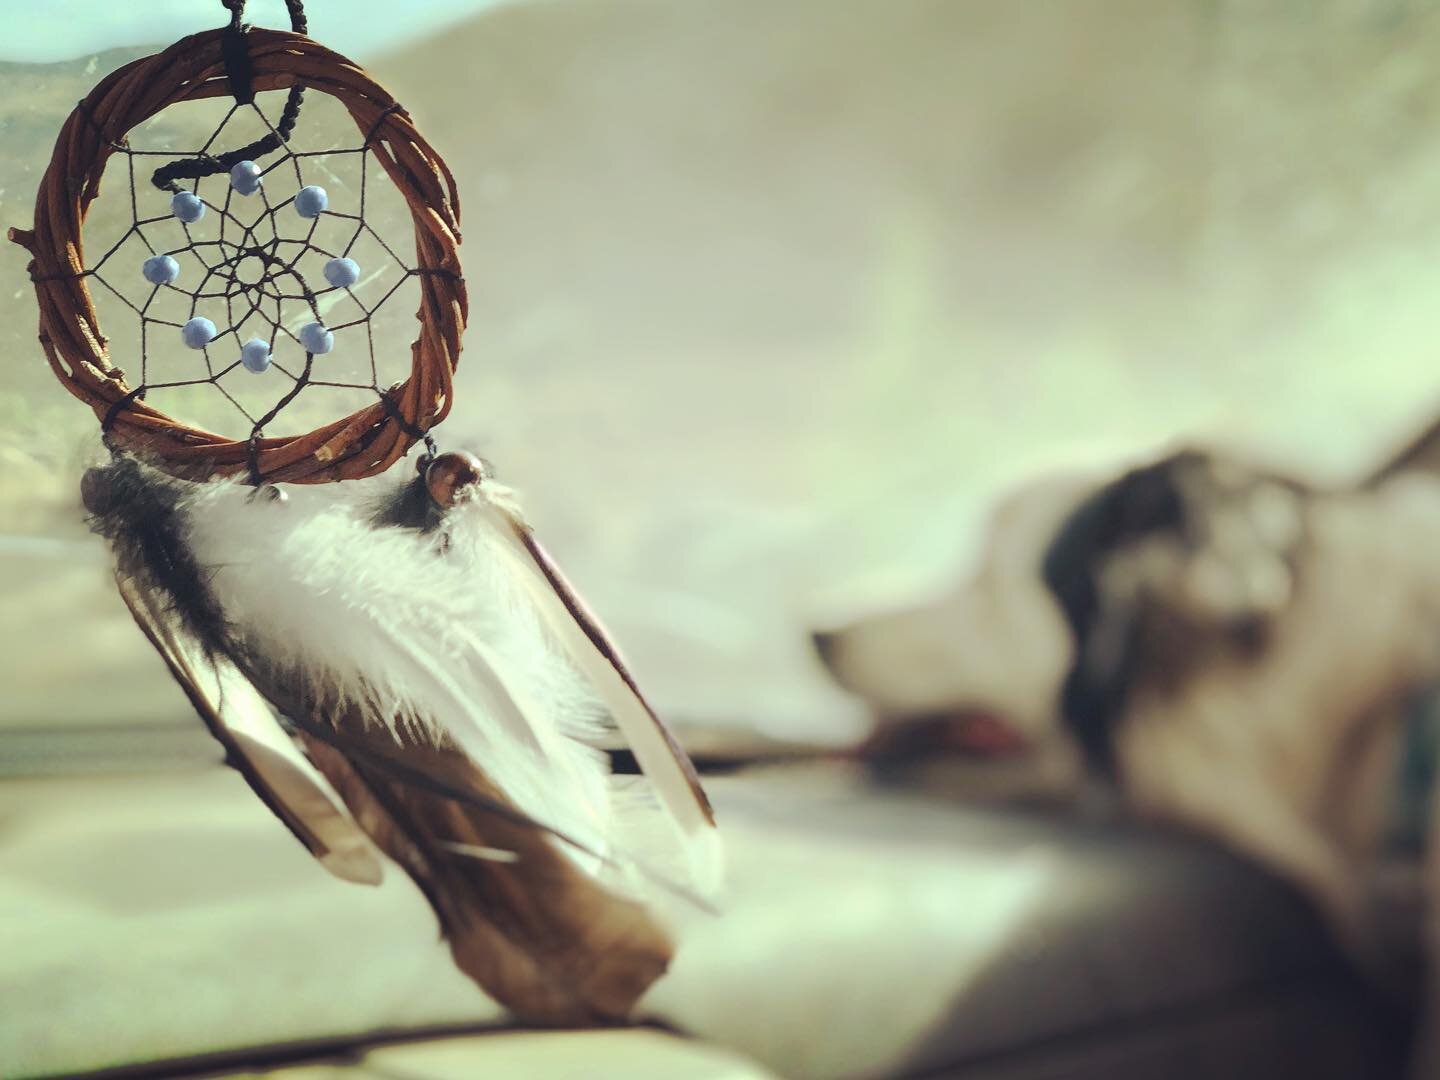 &ldquo;Dreams are illustrations from the book your soul is writing about you.&rdquo; Marsha Norman 
#ibelieve #dreamcatcher #soulseeker #tailsman #pursueyourdreams #protectyourdreams #goodvibesonly #roddickthedog #craftanddreams #dustyroads 
#roadtri